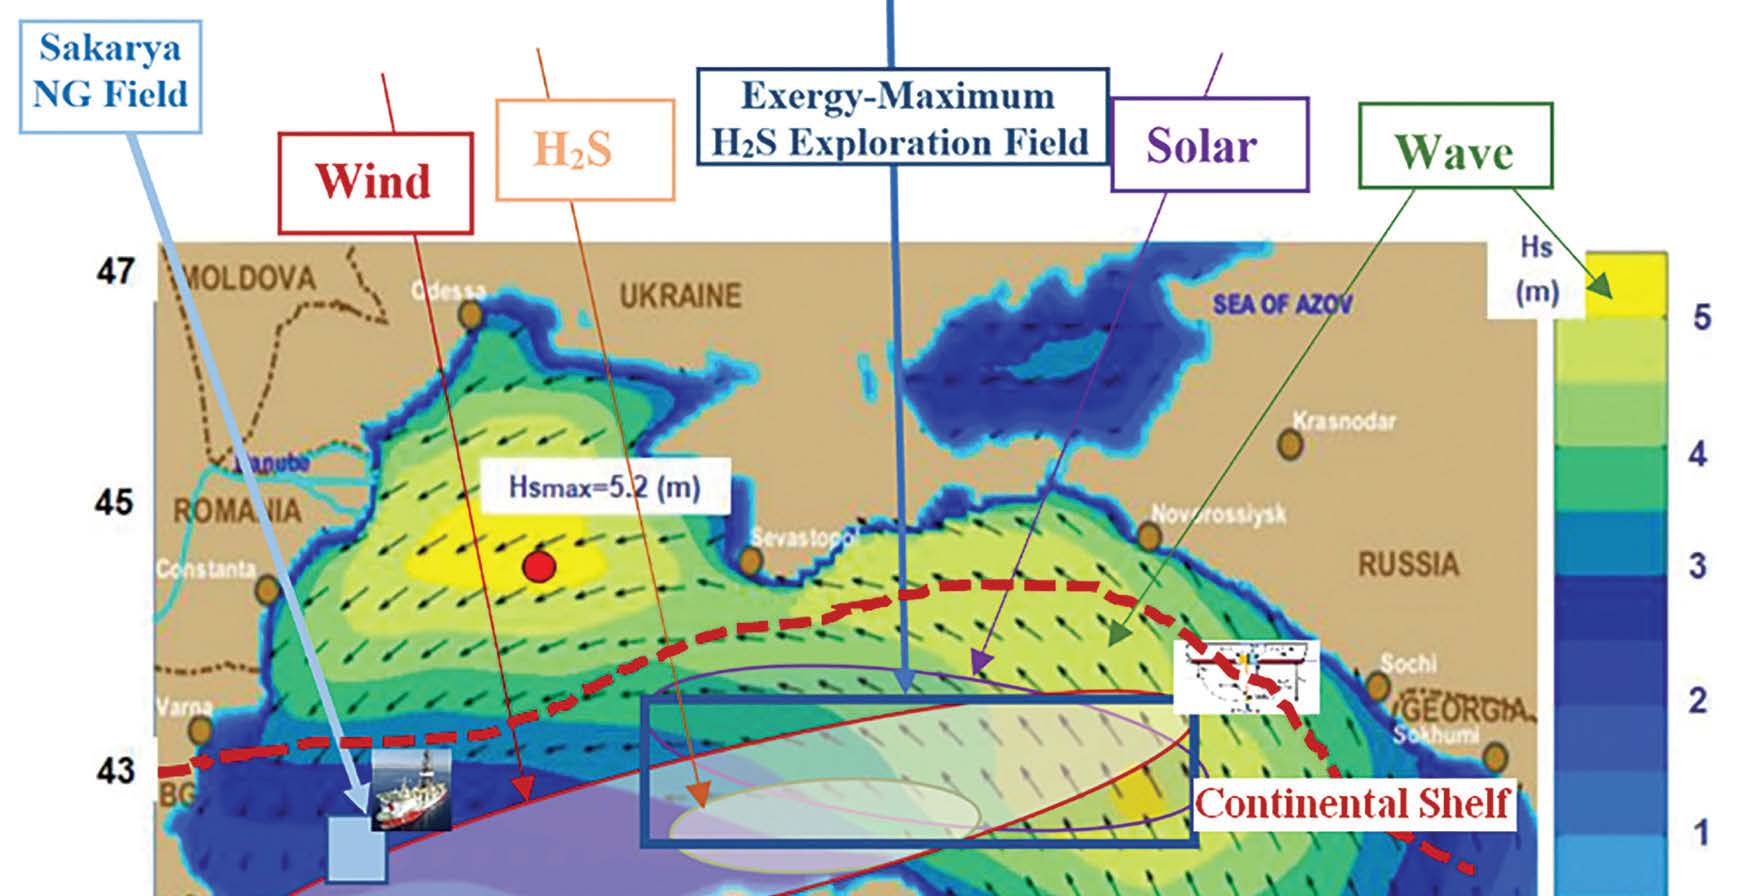 Figure 3: Composite map of renewables overlaid with wave energy for exergy-maximum H2S exploration field. The Figure also shows the most recently discovered natural gas field by TPAO with 320x109 m3 reserve. (Announced on August 21, 2020)